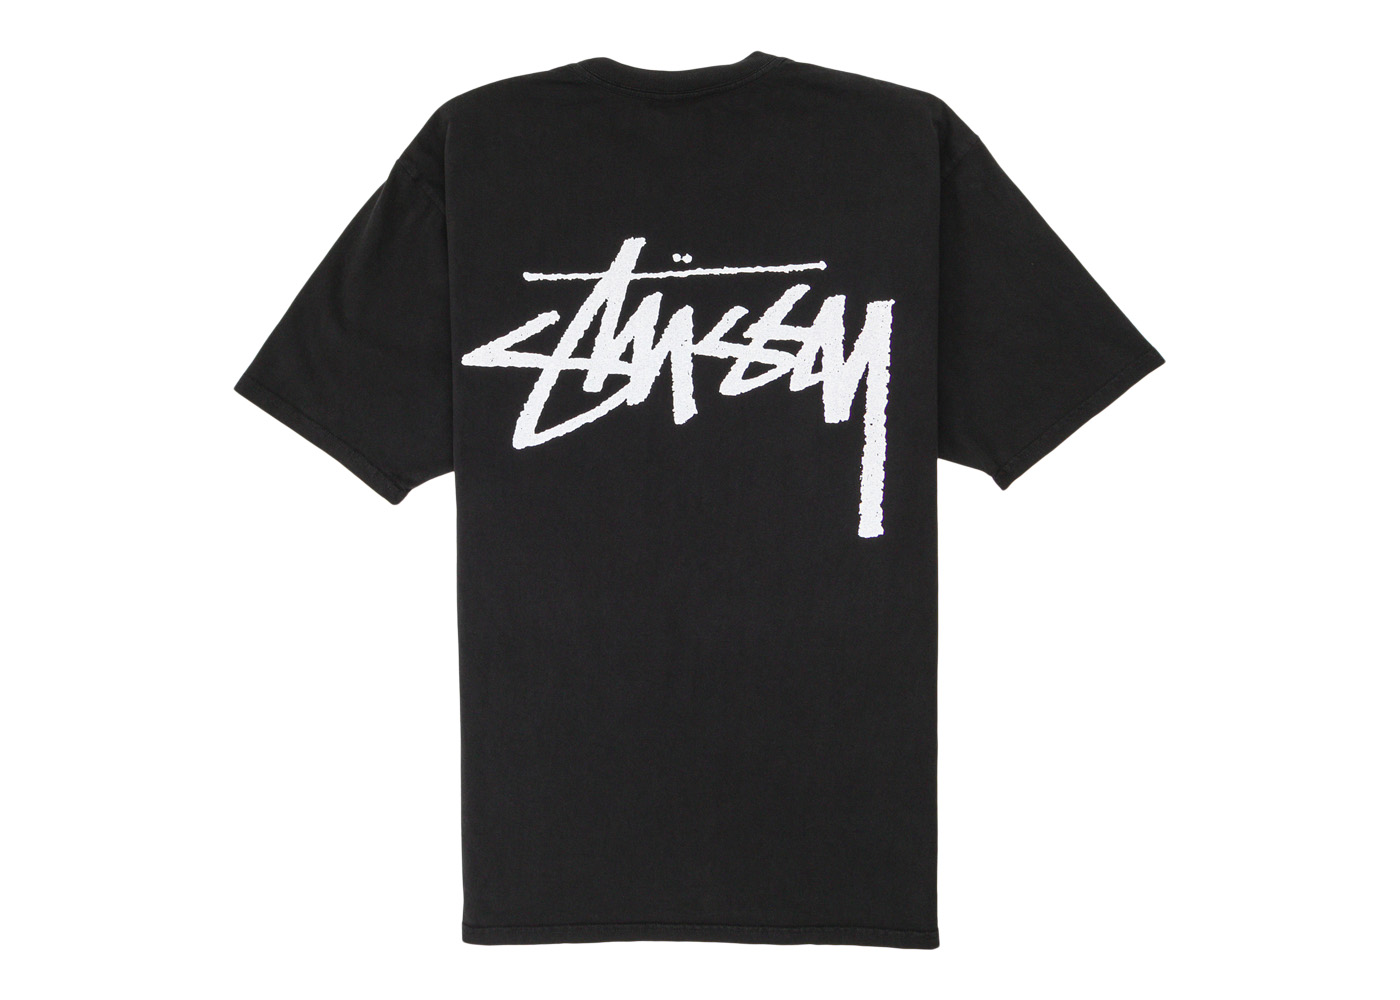 Stussy x Our Legacy Work Shop Yin Yang Pigment Dyed Tee Black